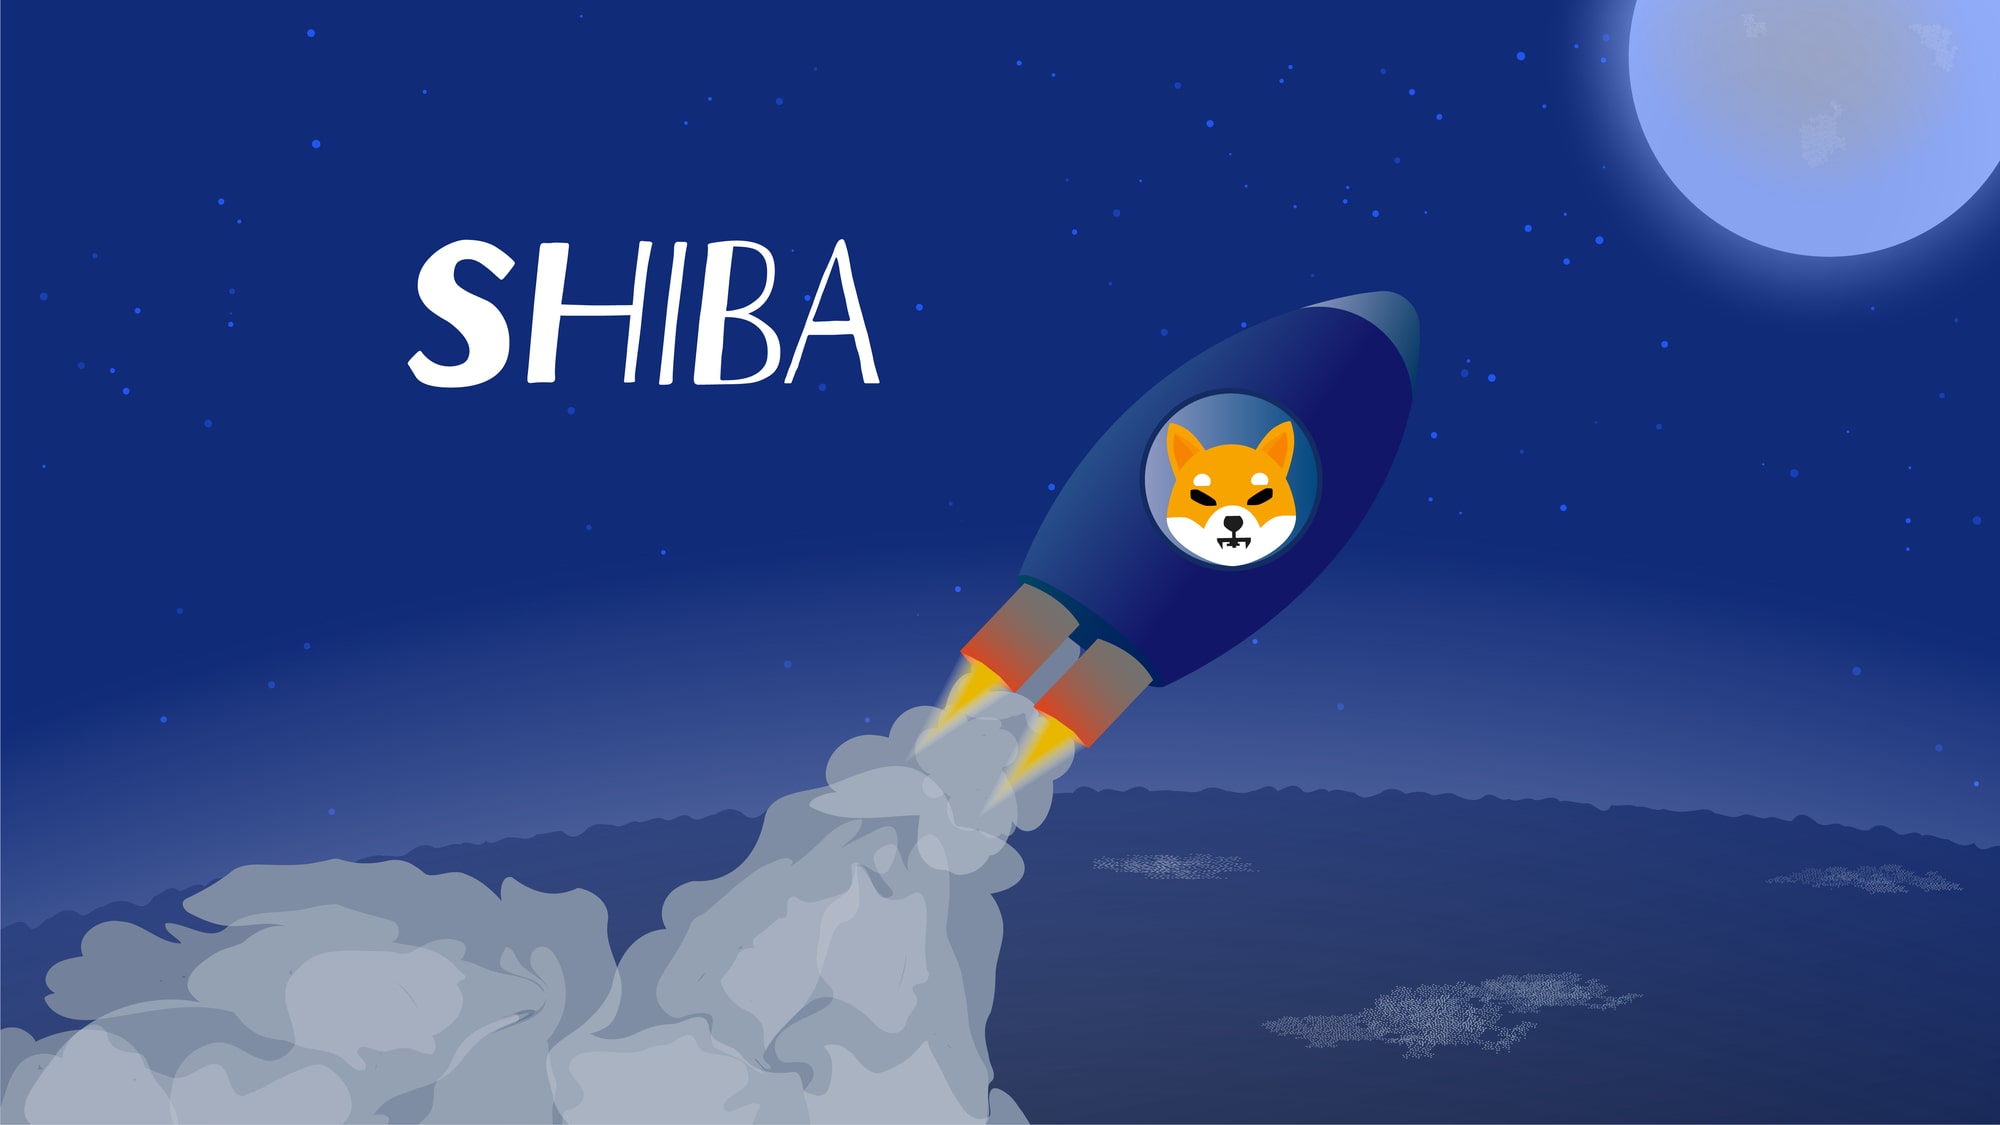 Shiba Inu surpasses Bitcoin and Dogecoin as the most viewed crypto in 2021